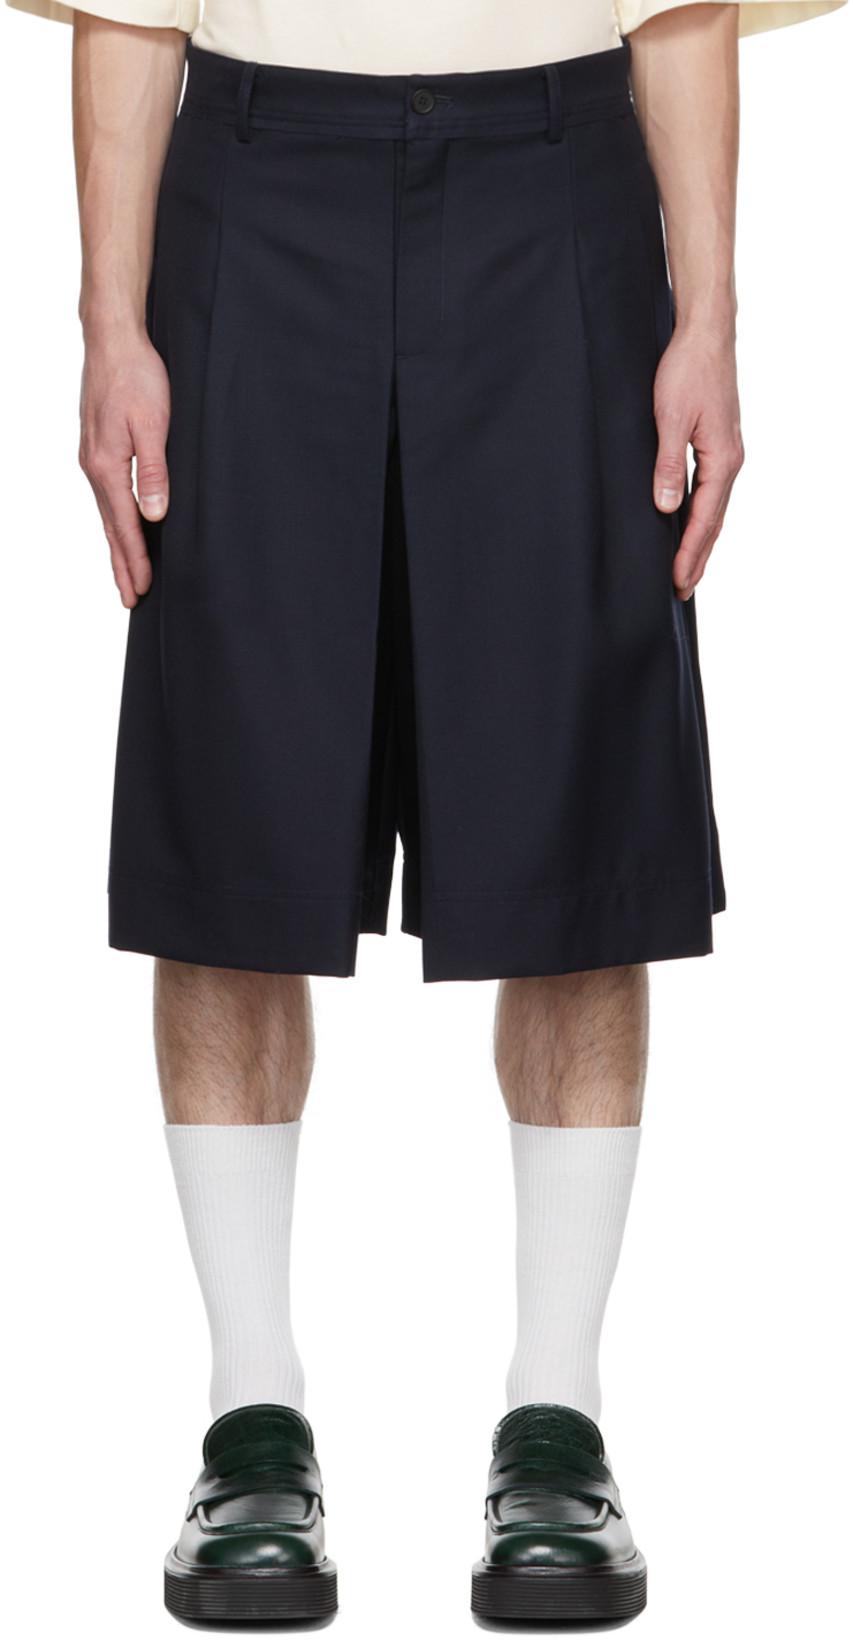 Navy Pirate Shorts by A PERSONAL NOTE 73